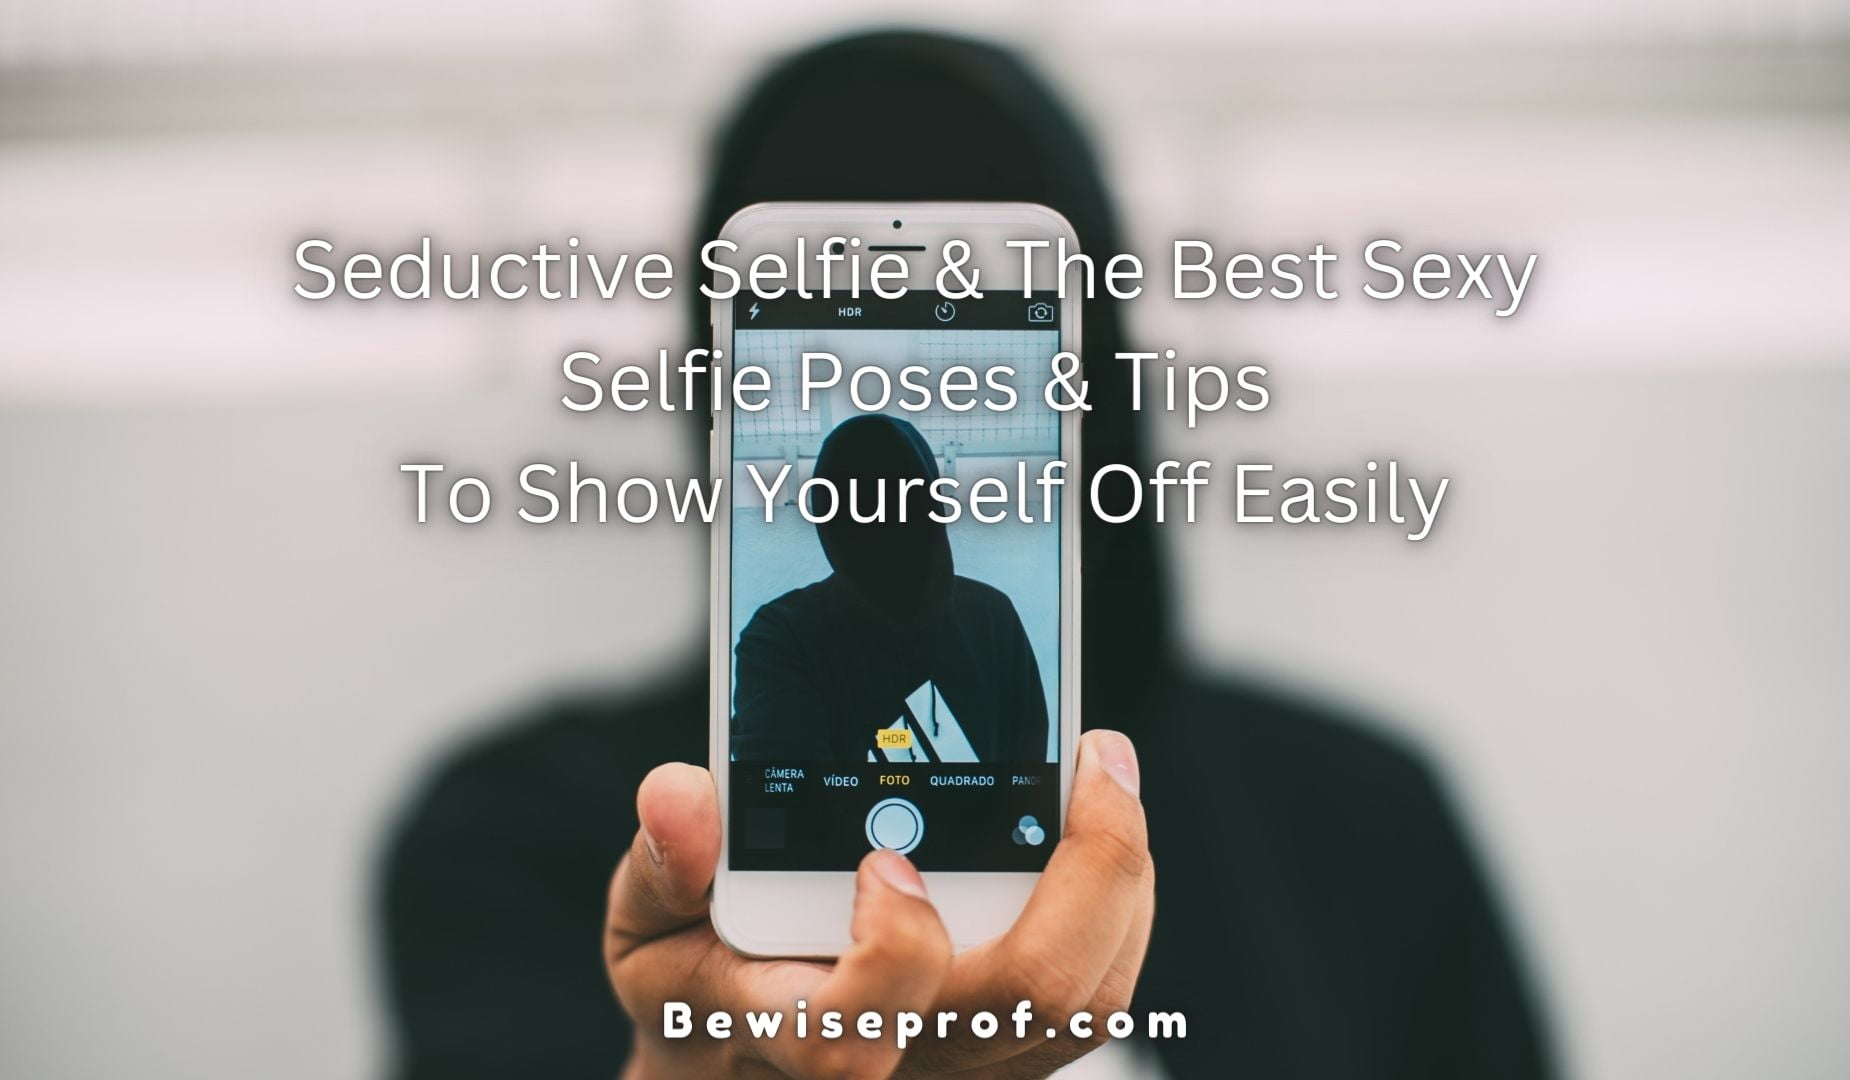 Seductive Selfie And The Best Sexy Selfie Poses & Tips